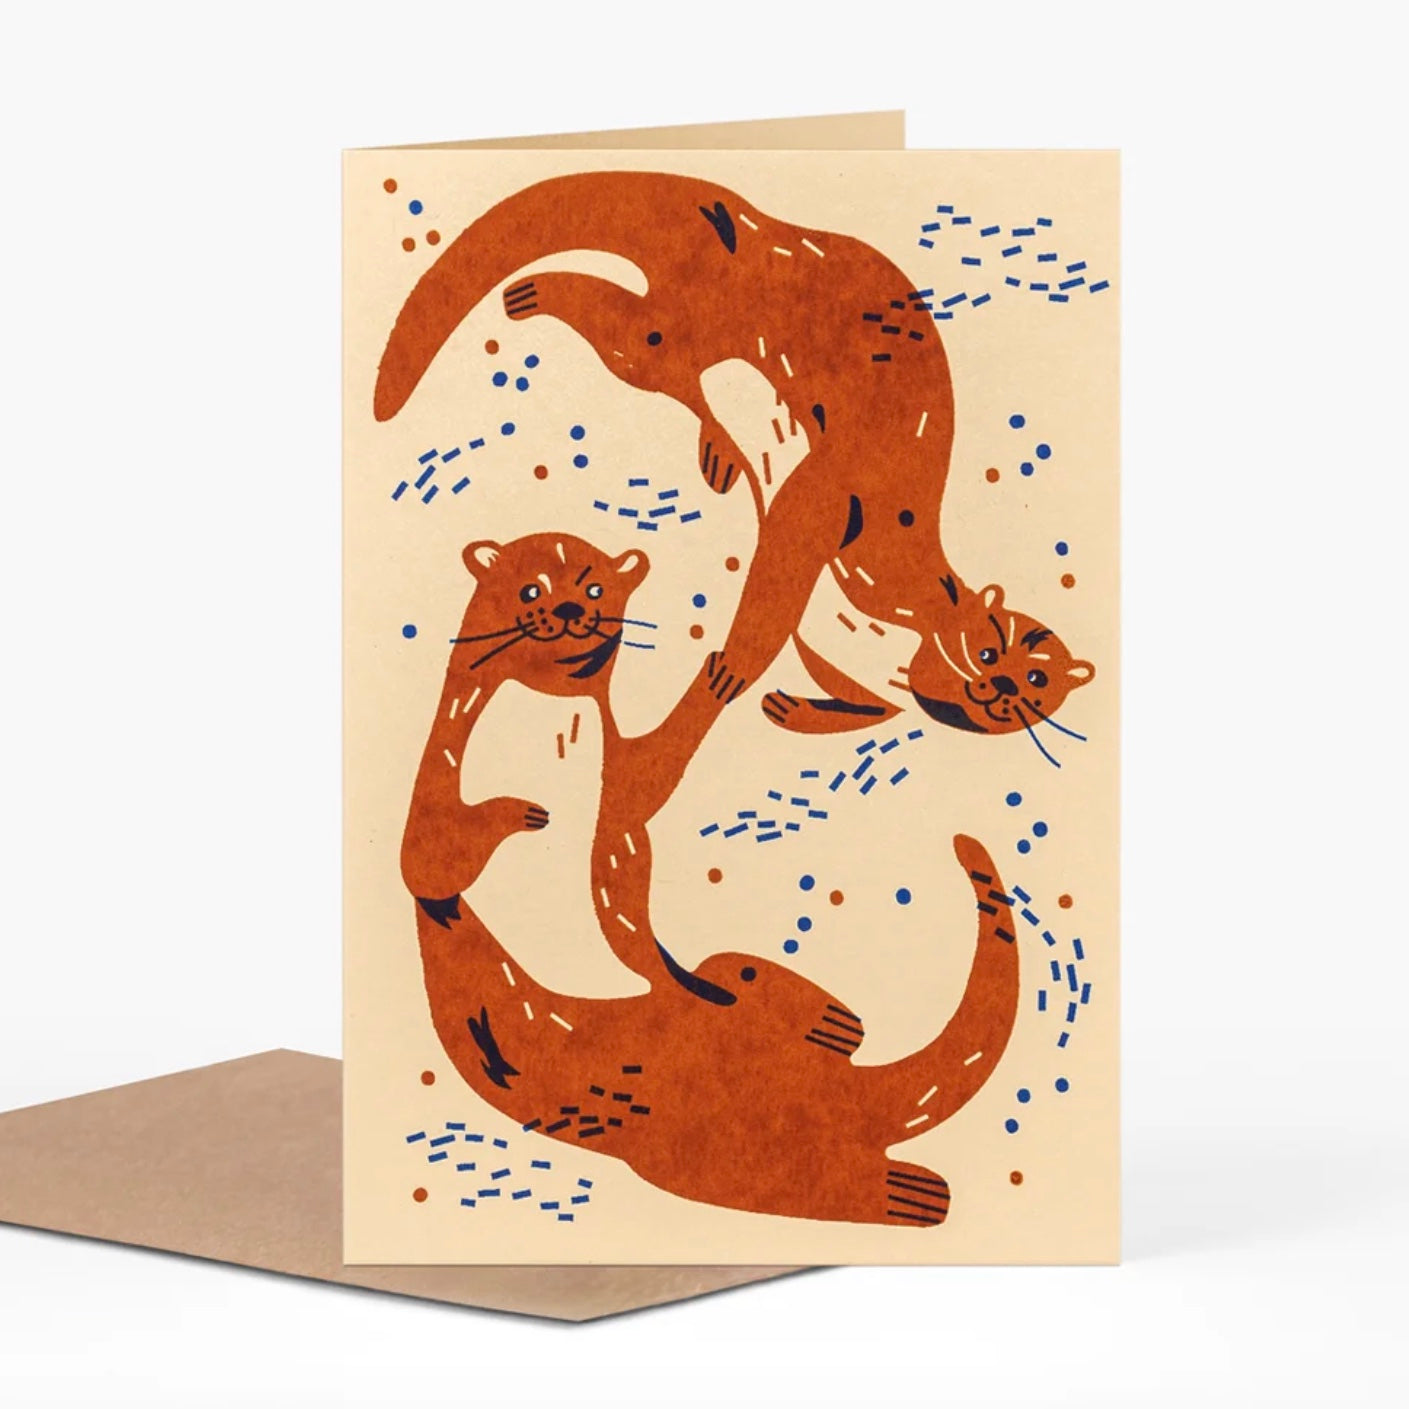 Hand Printed Hand Holding Otters Greetings Card